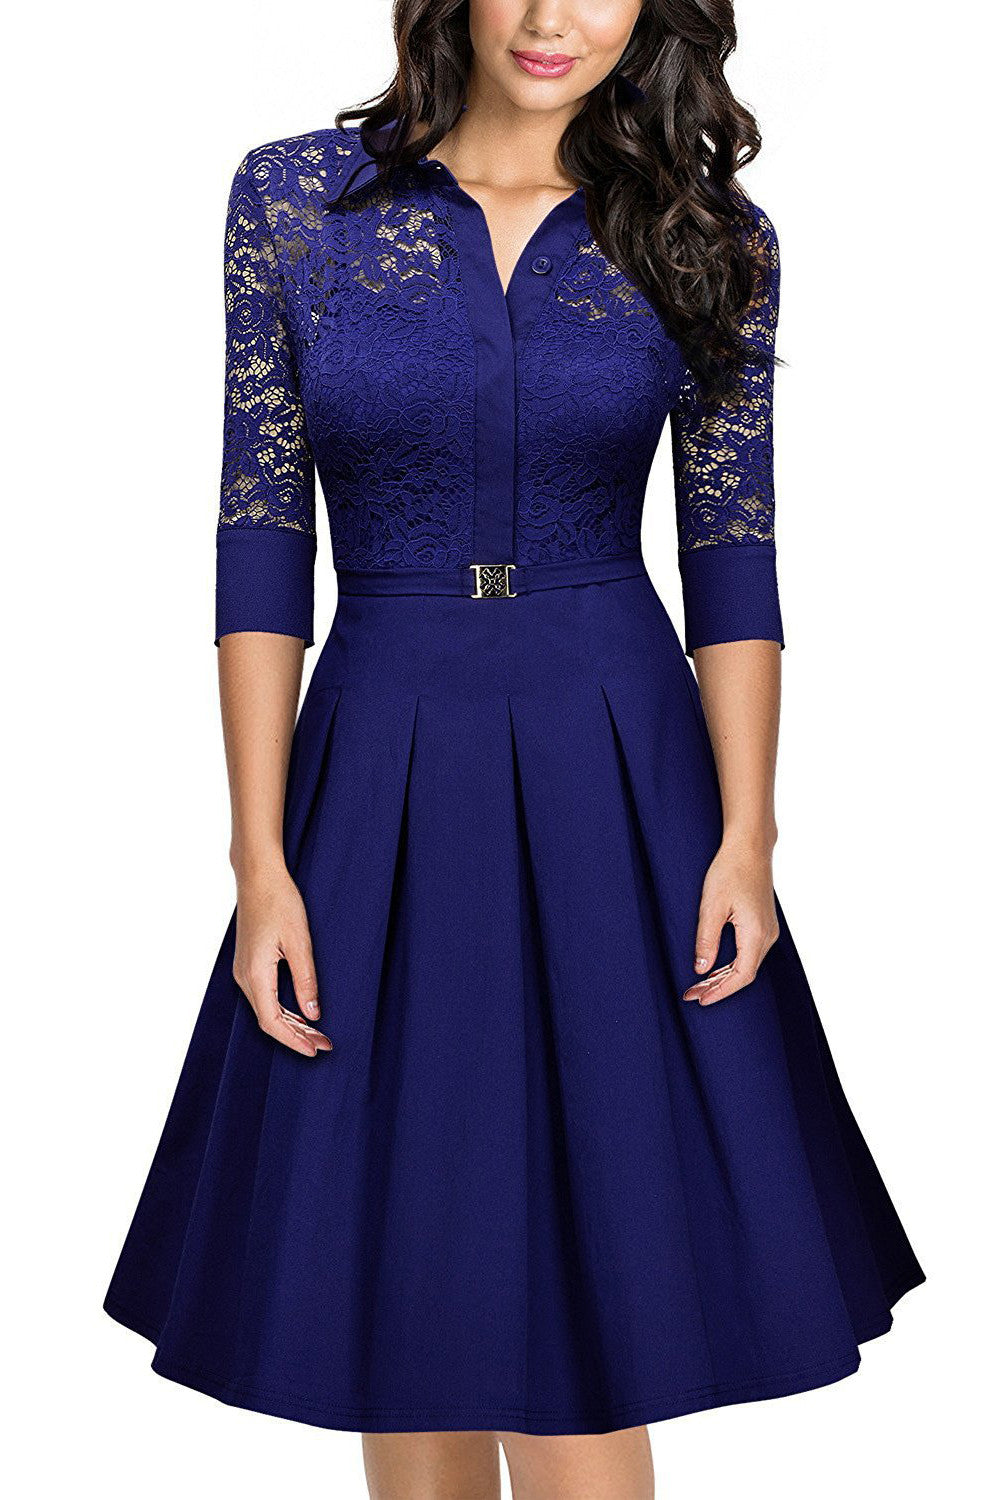 Lace Long Sleeves Solid Splicing Pleated Short Dress